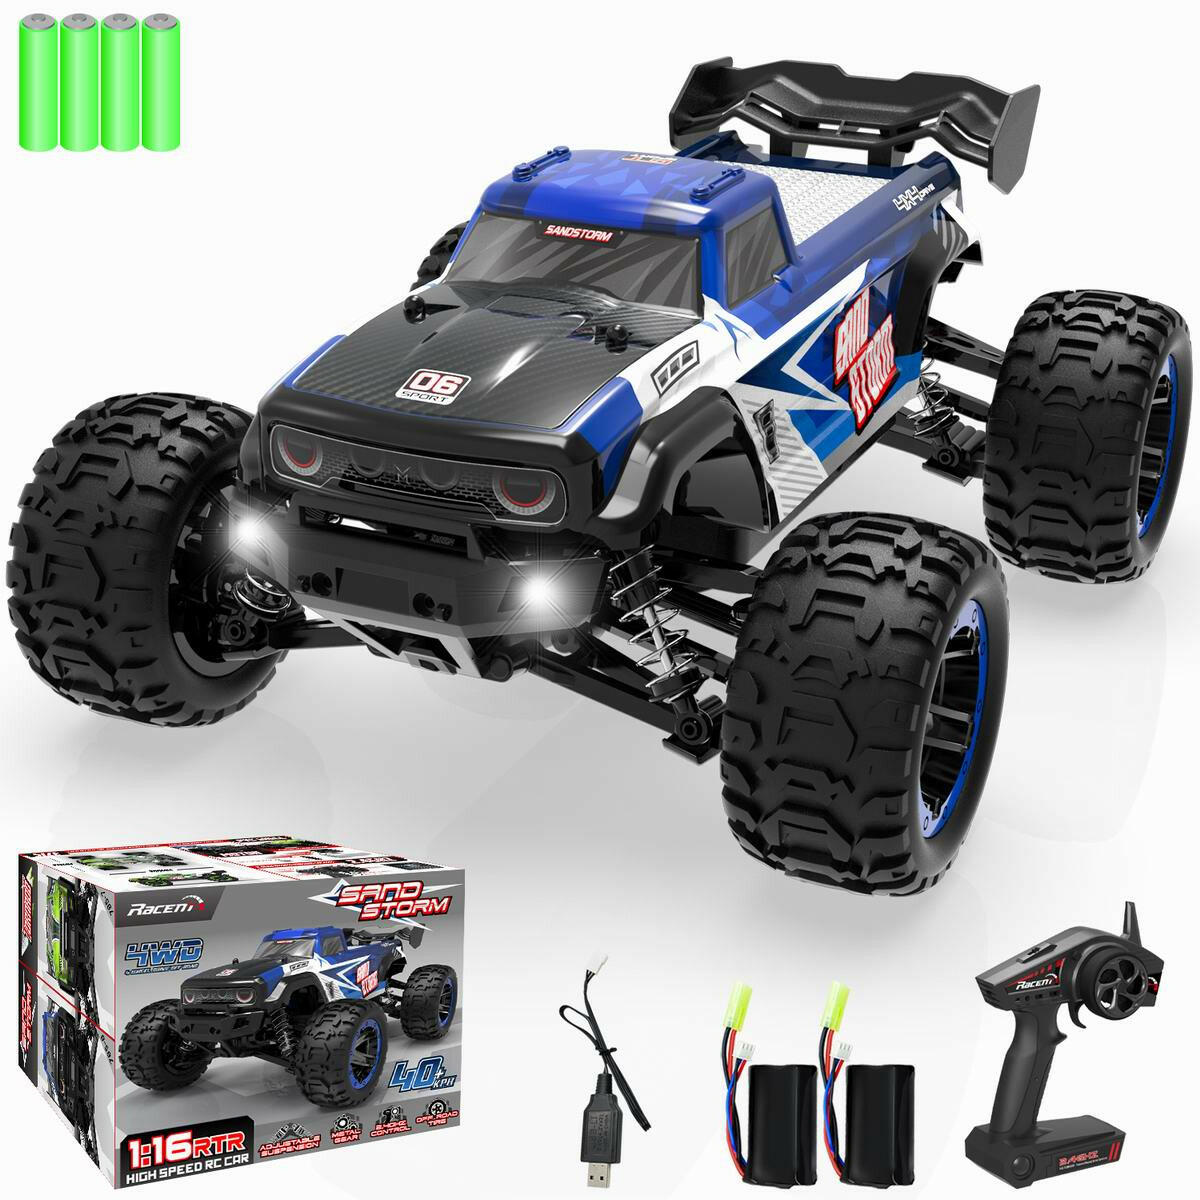 Sand Strom 1:16 High Speed RC Truck Racent Official